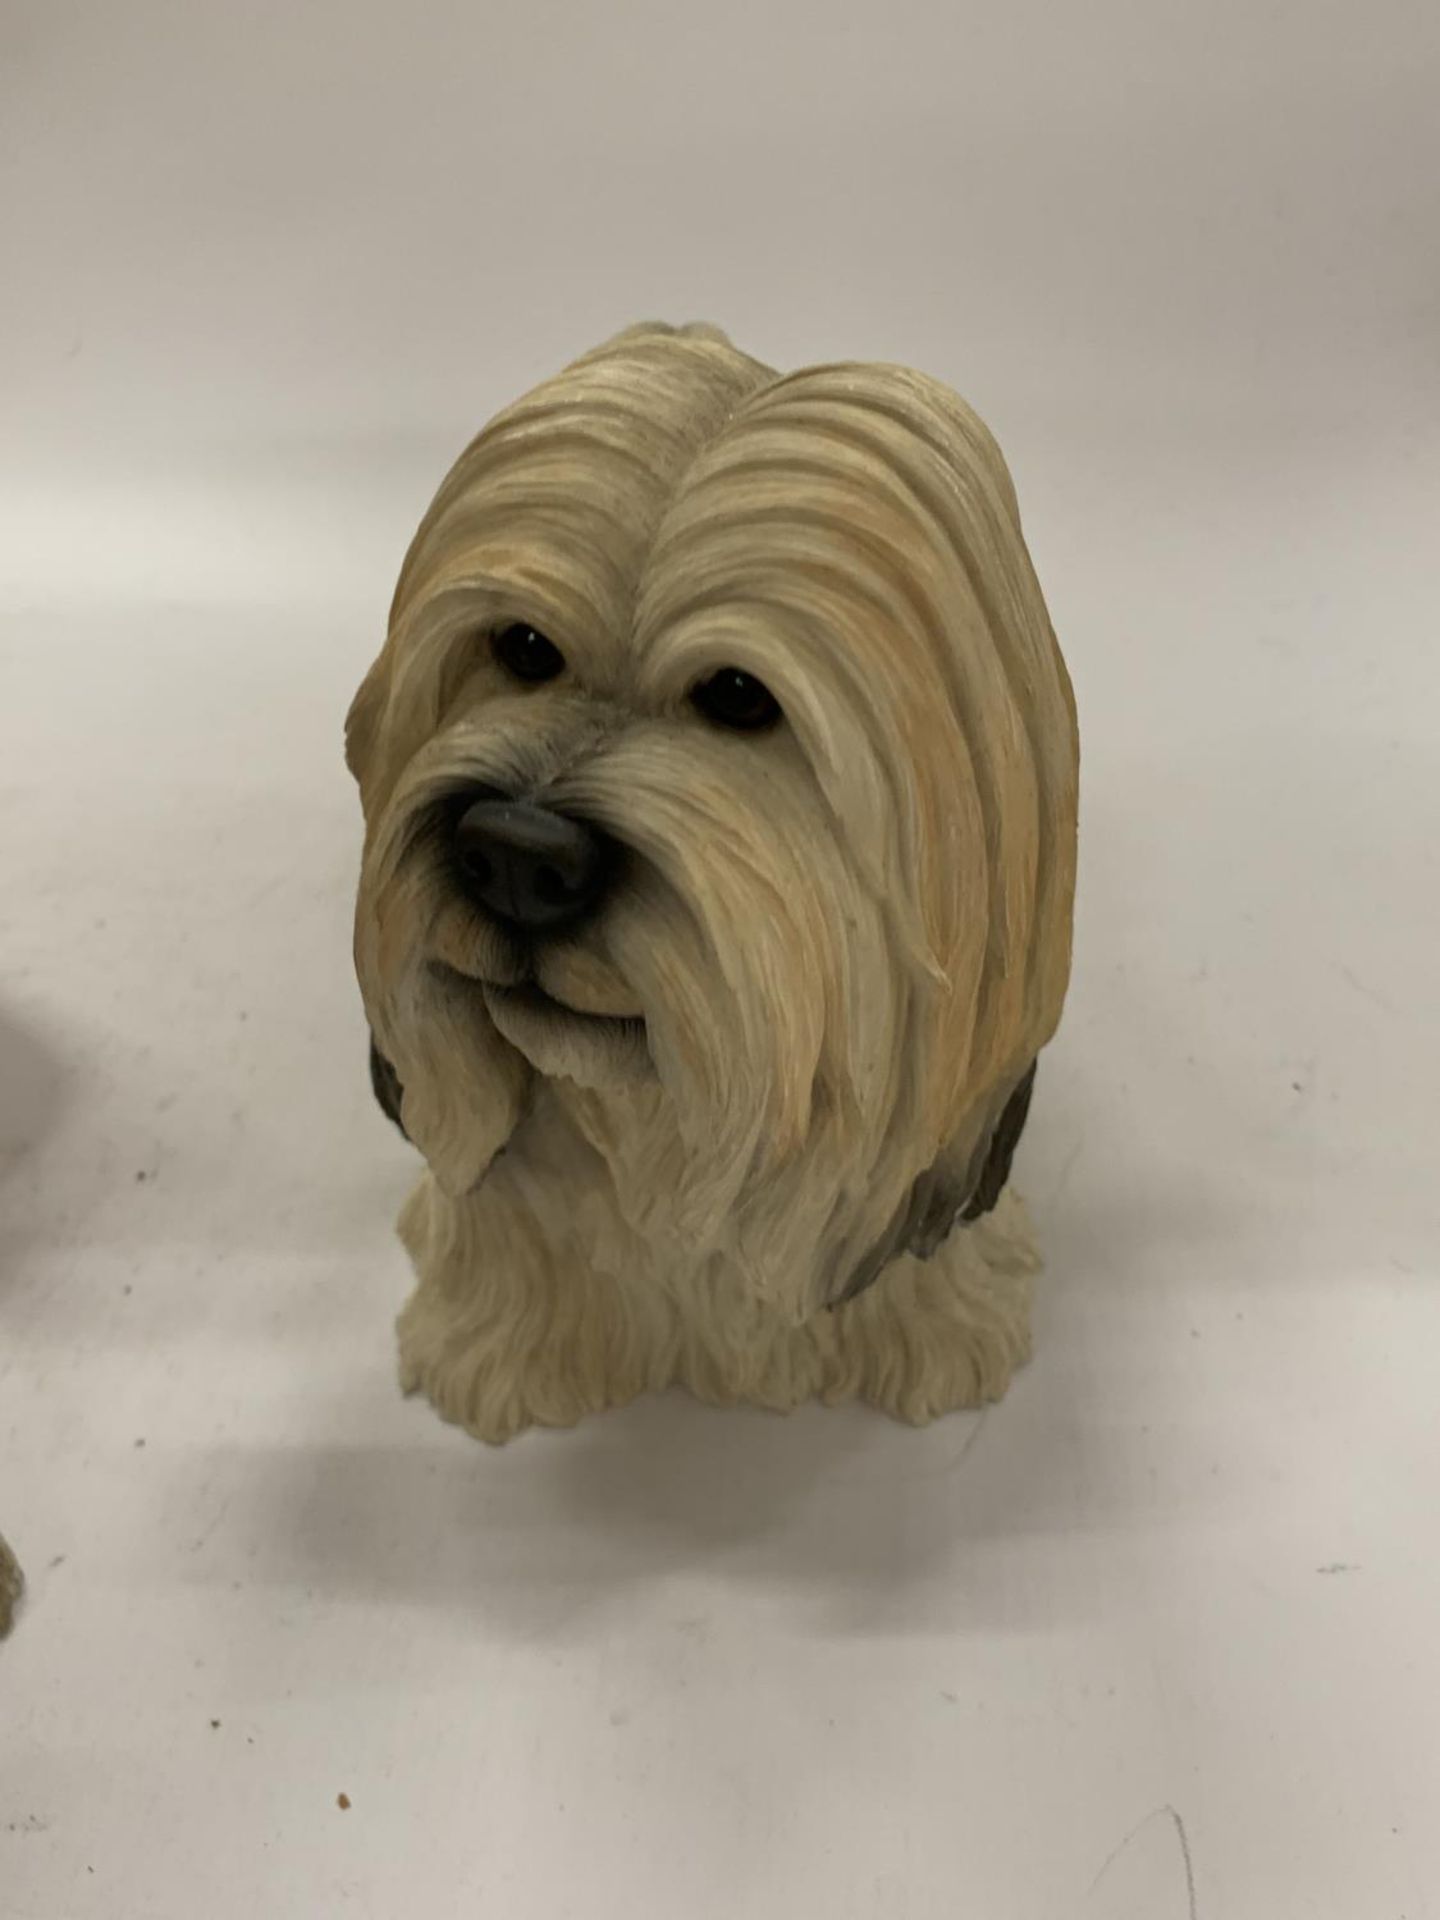 TWO LARGE DOG FIGURES BY LEONARDO, A STAFFORDSHIRE BULL TERRIER HEIGHT 34CM AND A LHASA APSO - Image 6 of 8